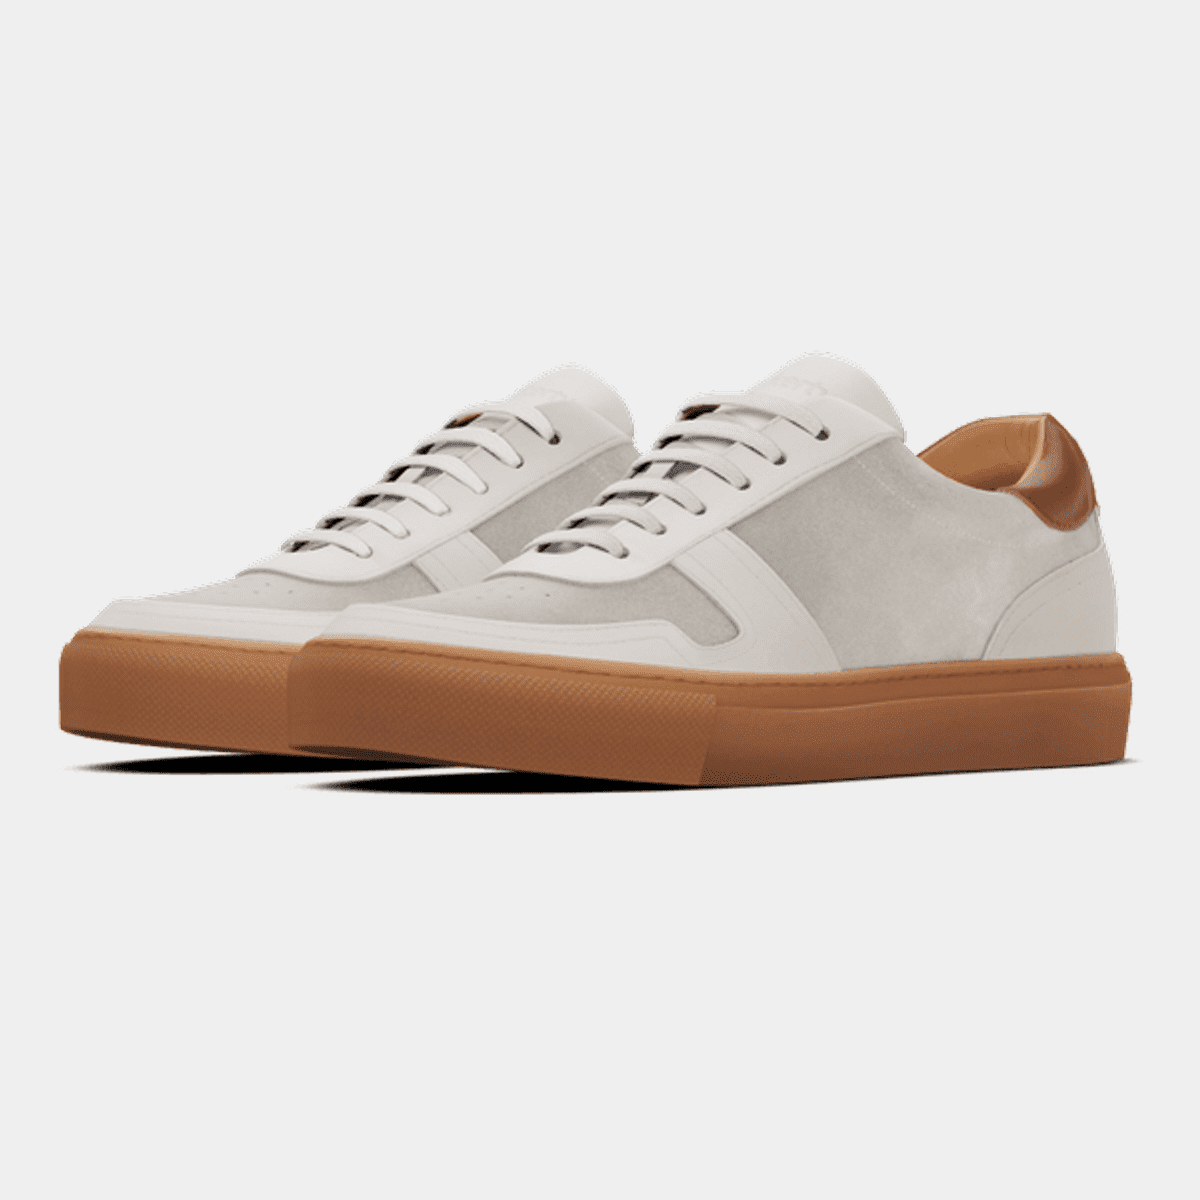 Off-white, grey & brown leather and suede Sneakers with caramel sole